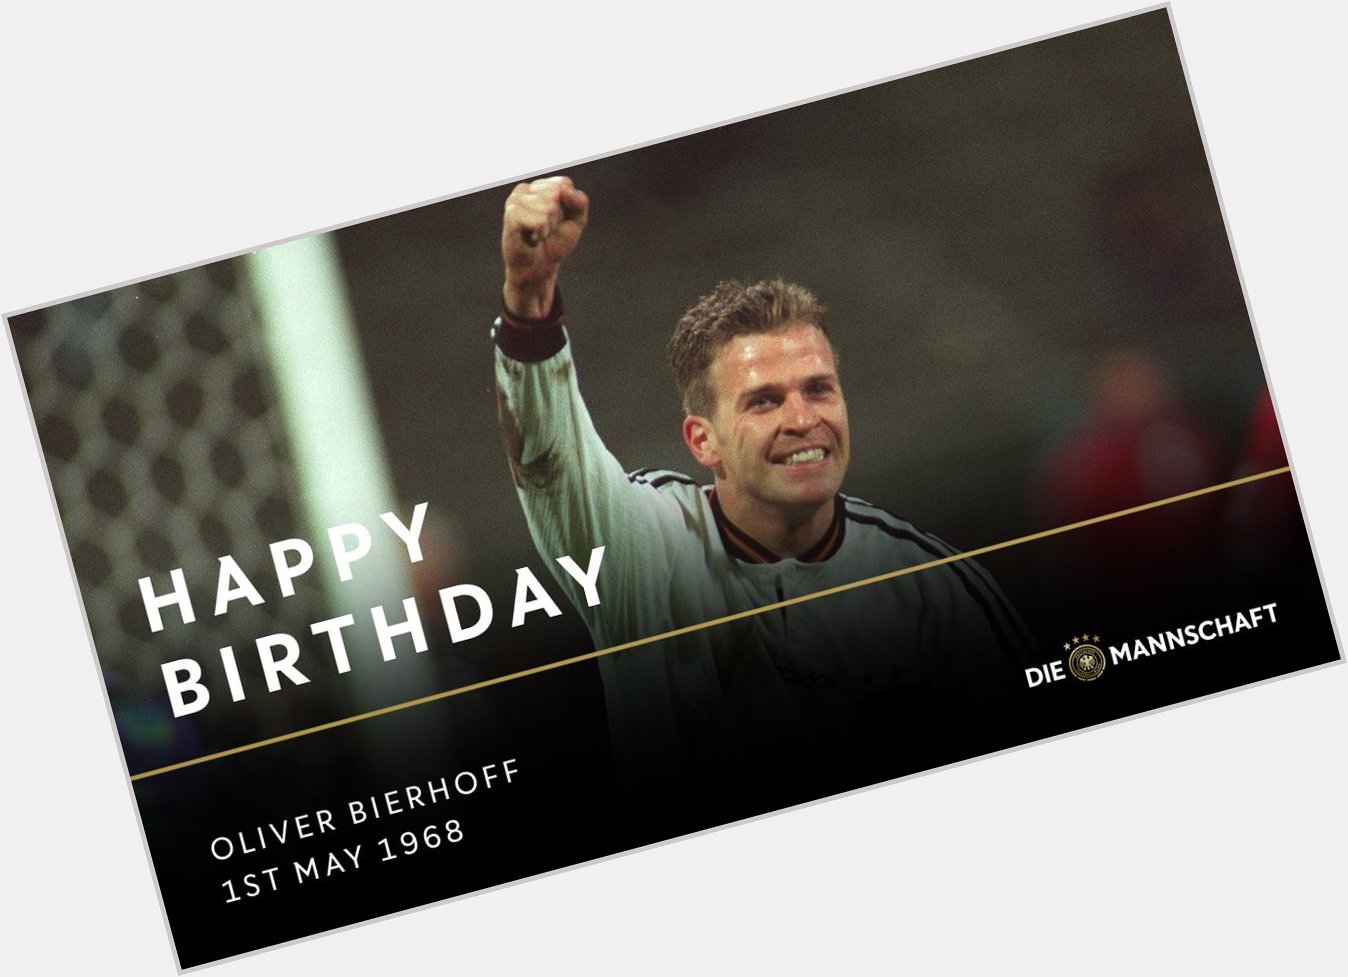 DFB_Team_EN: Happy 50th Birthday to our 1996 golden goal hero, Oliver      